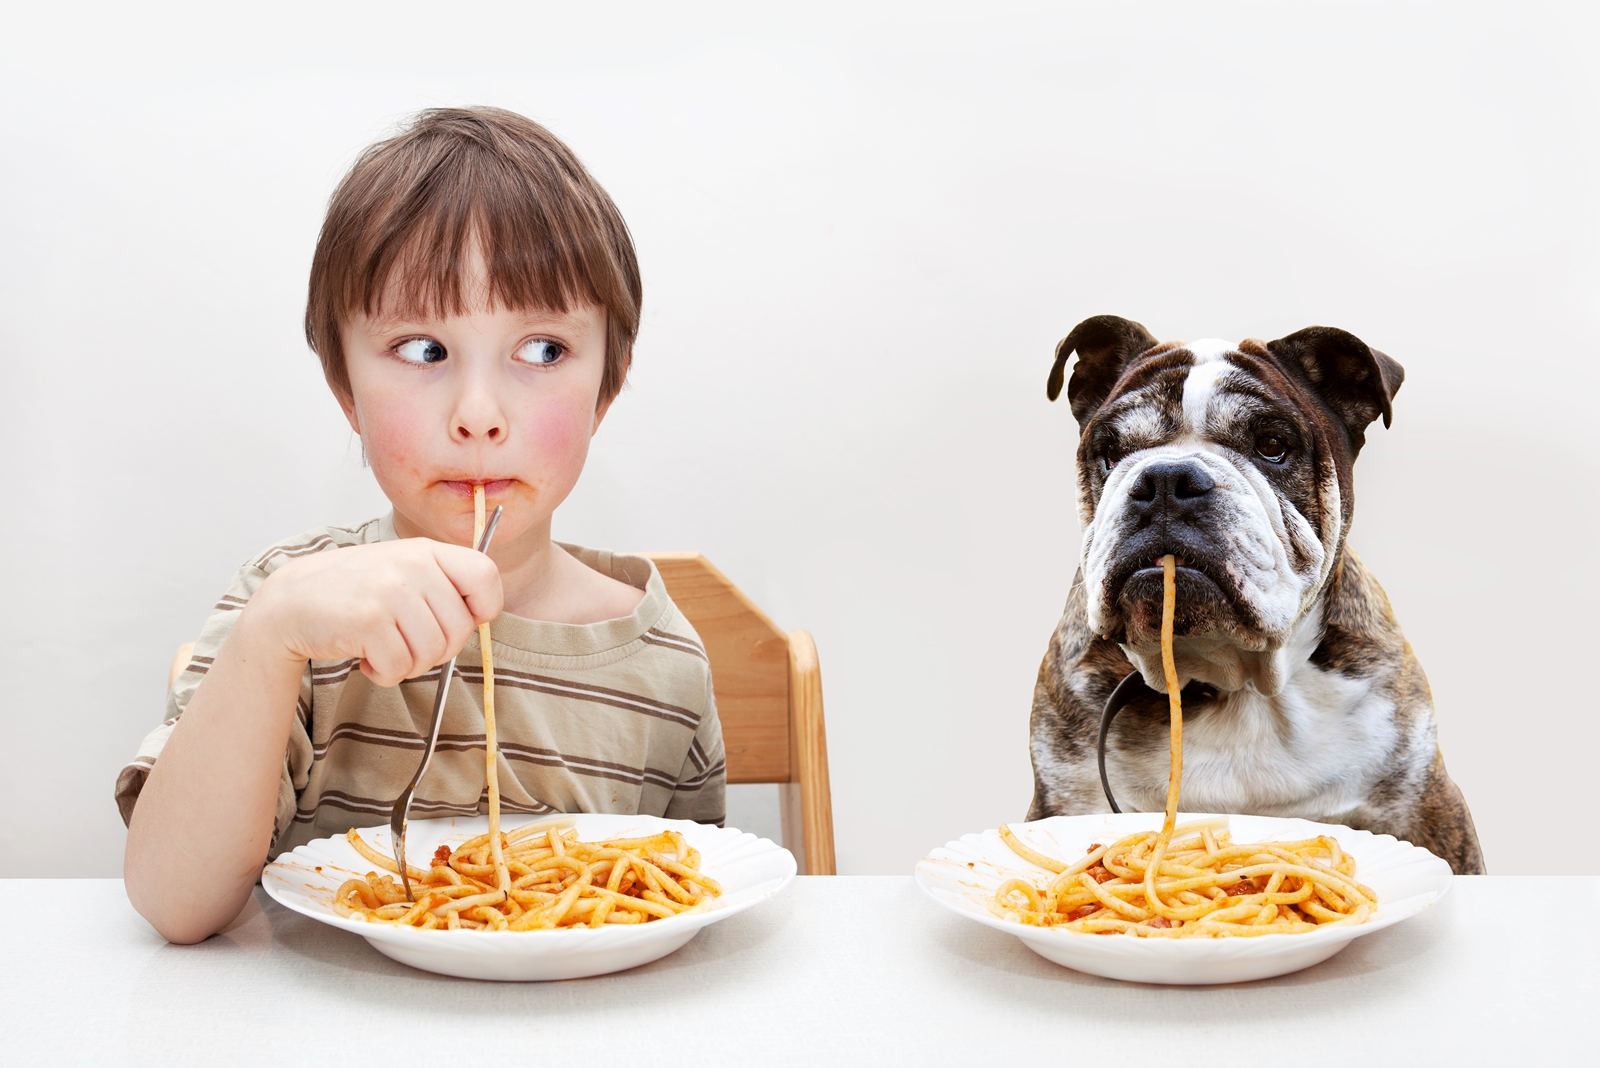 Can My Dog Eat This? A List of Human Foods Dogs Can and Can't Eat